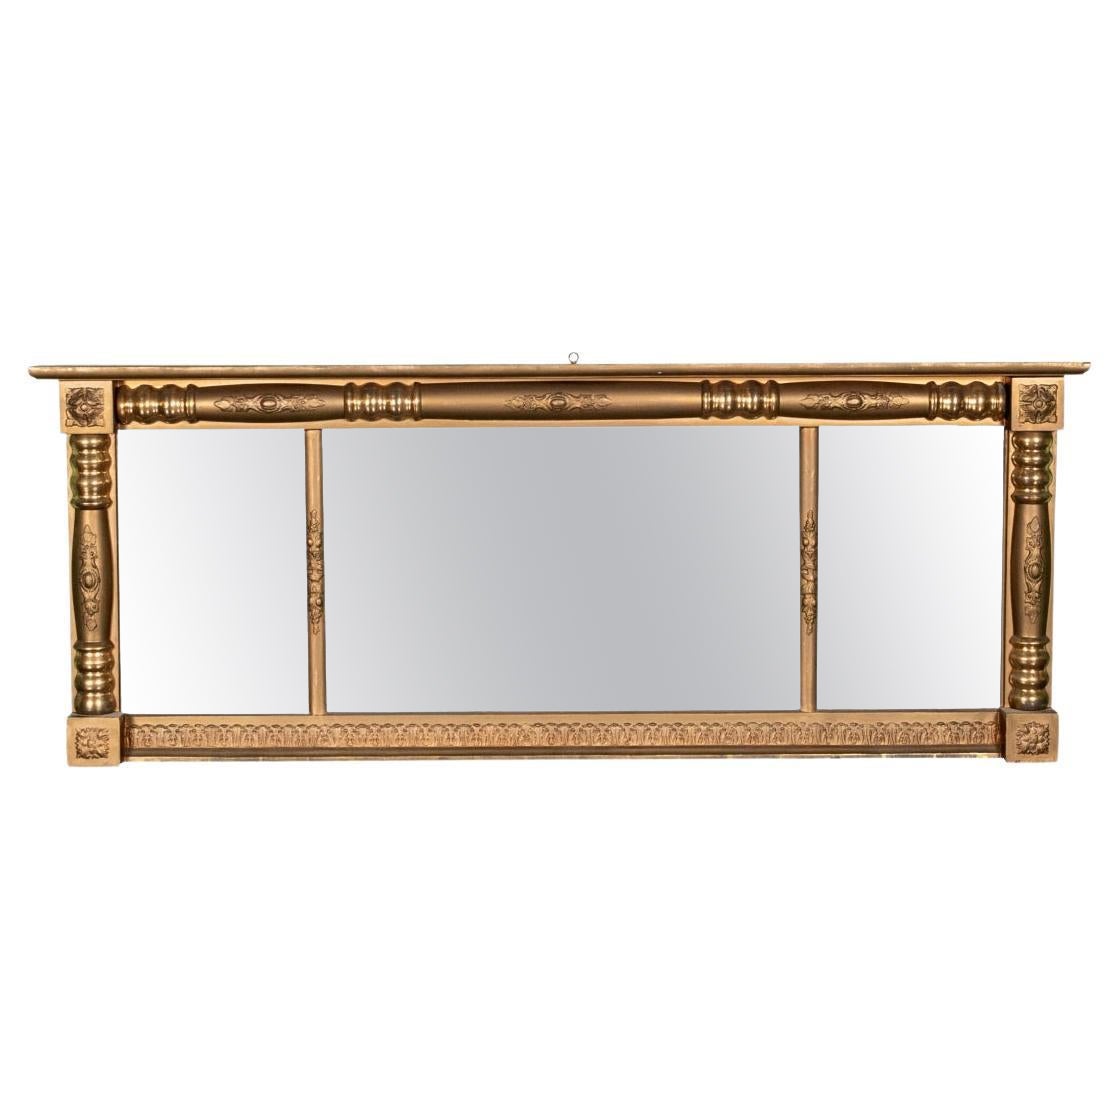 19th C. Carved And Gilt Over-the-Mantle Mirror